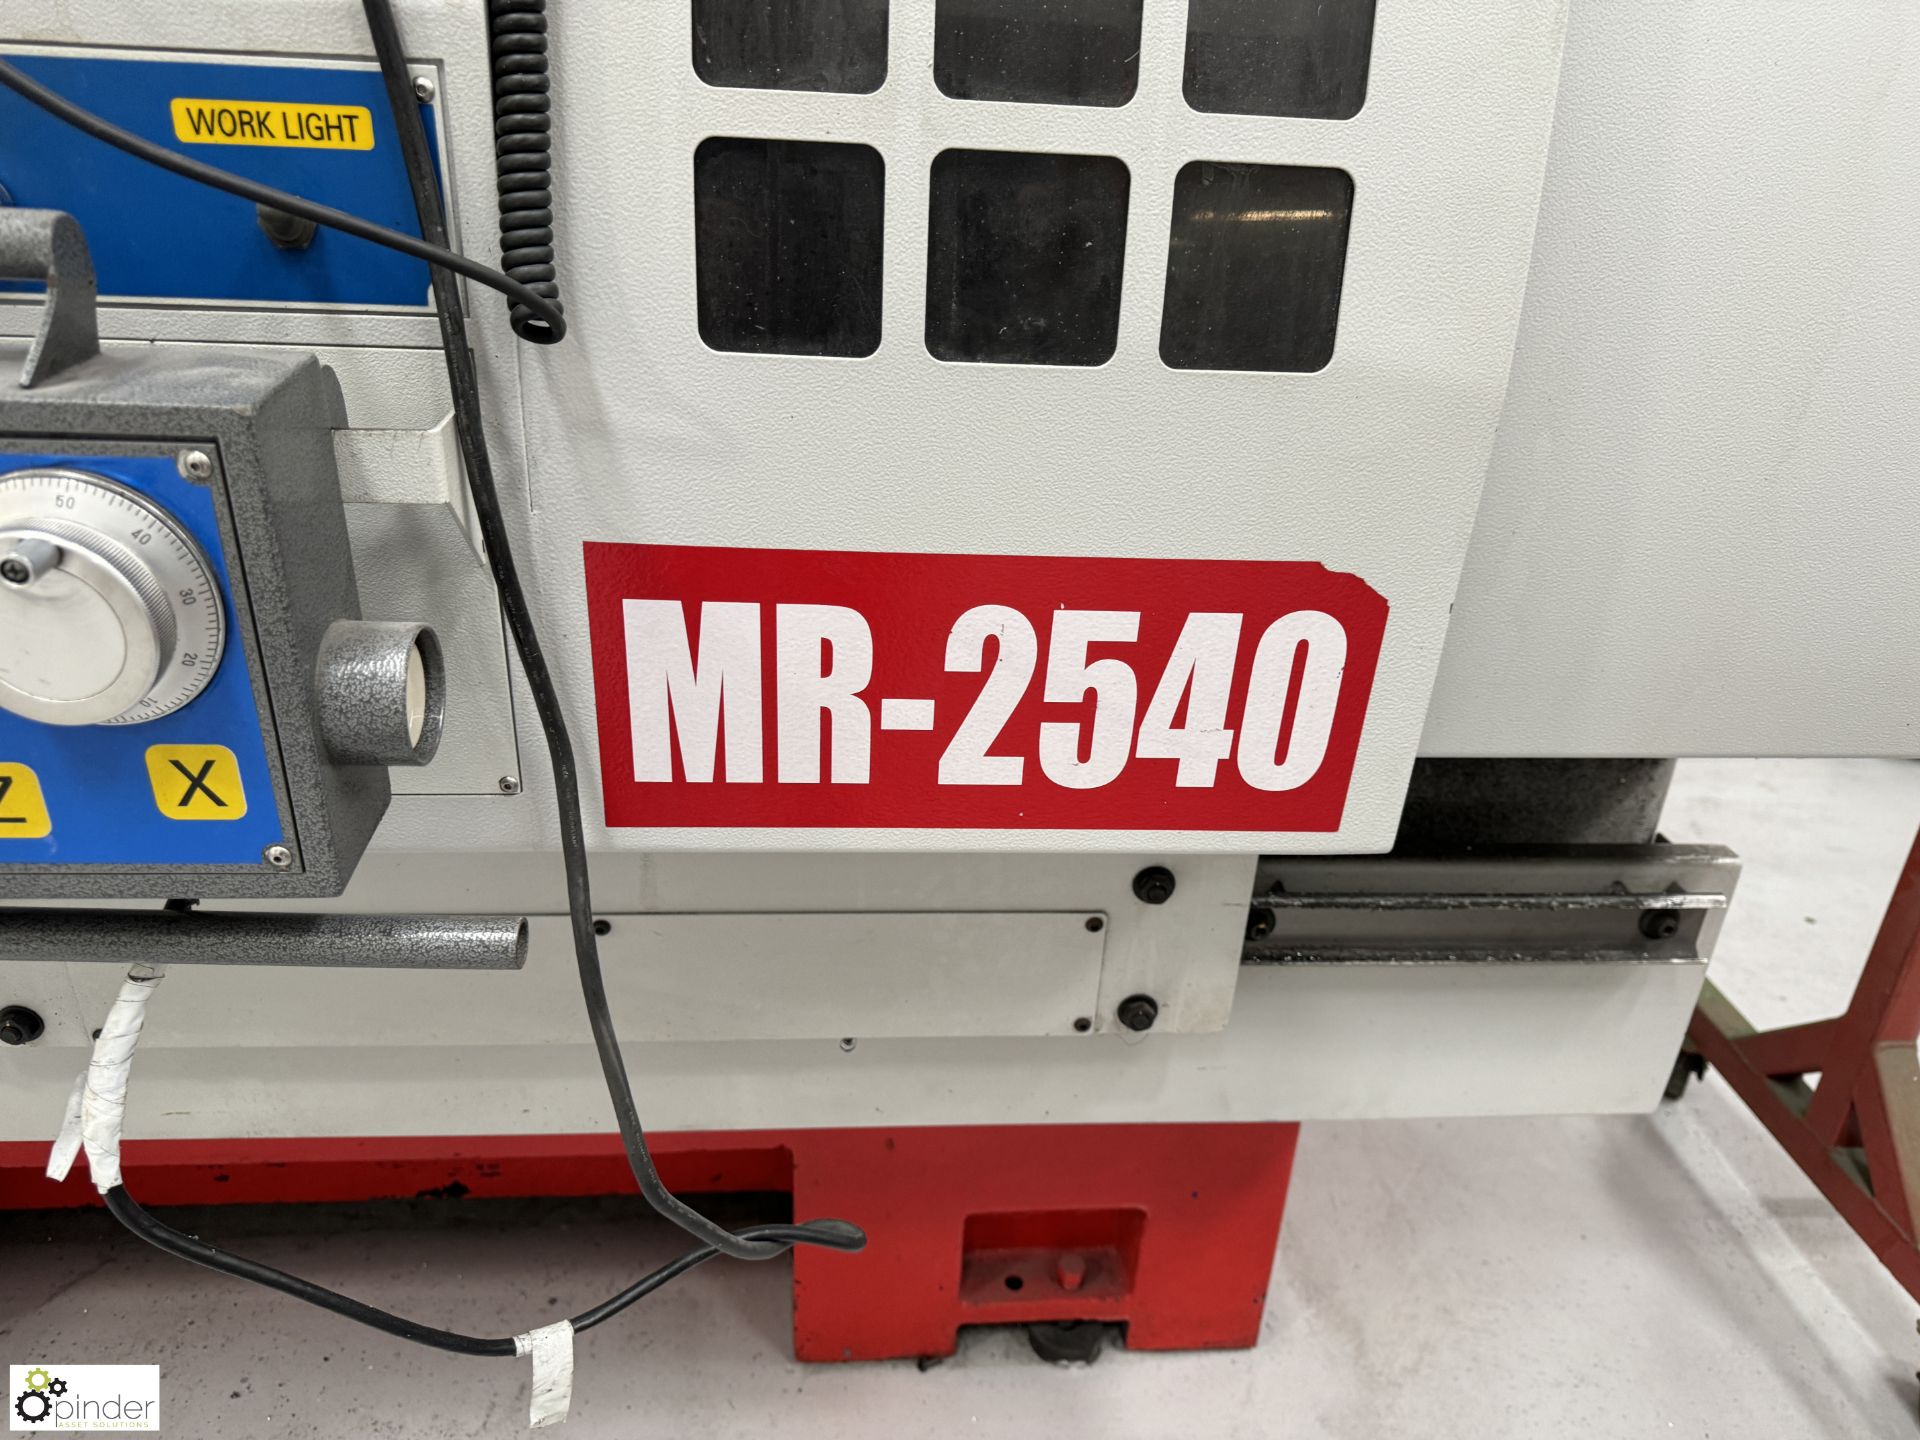 Lehigh MR-2540-Frame CNC Wheel Lathe, year 2015, serial number T0115050123 - Image 3 of 15